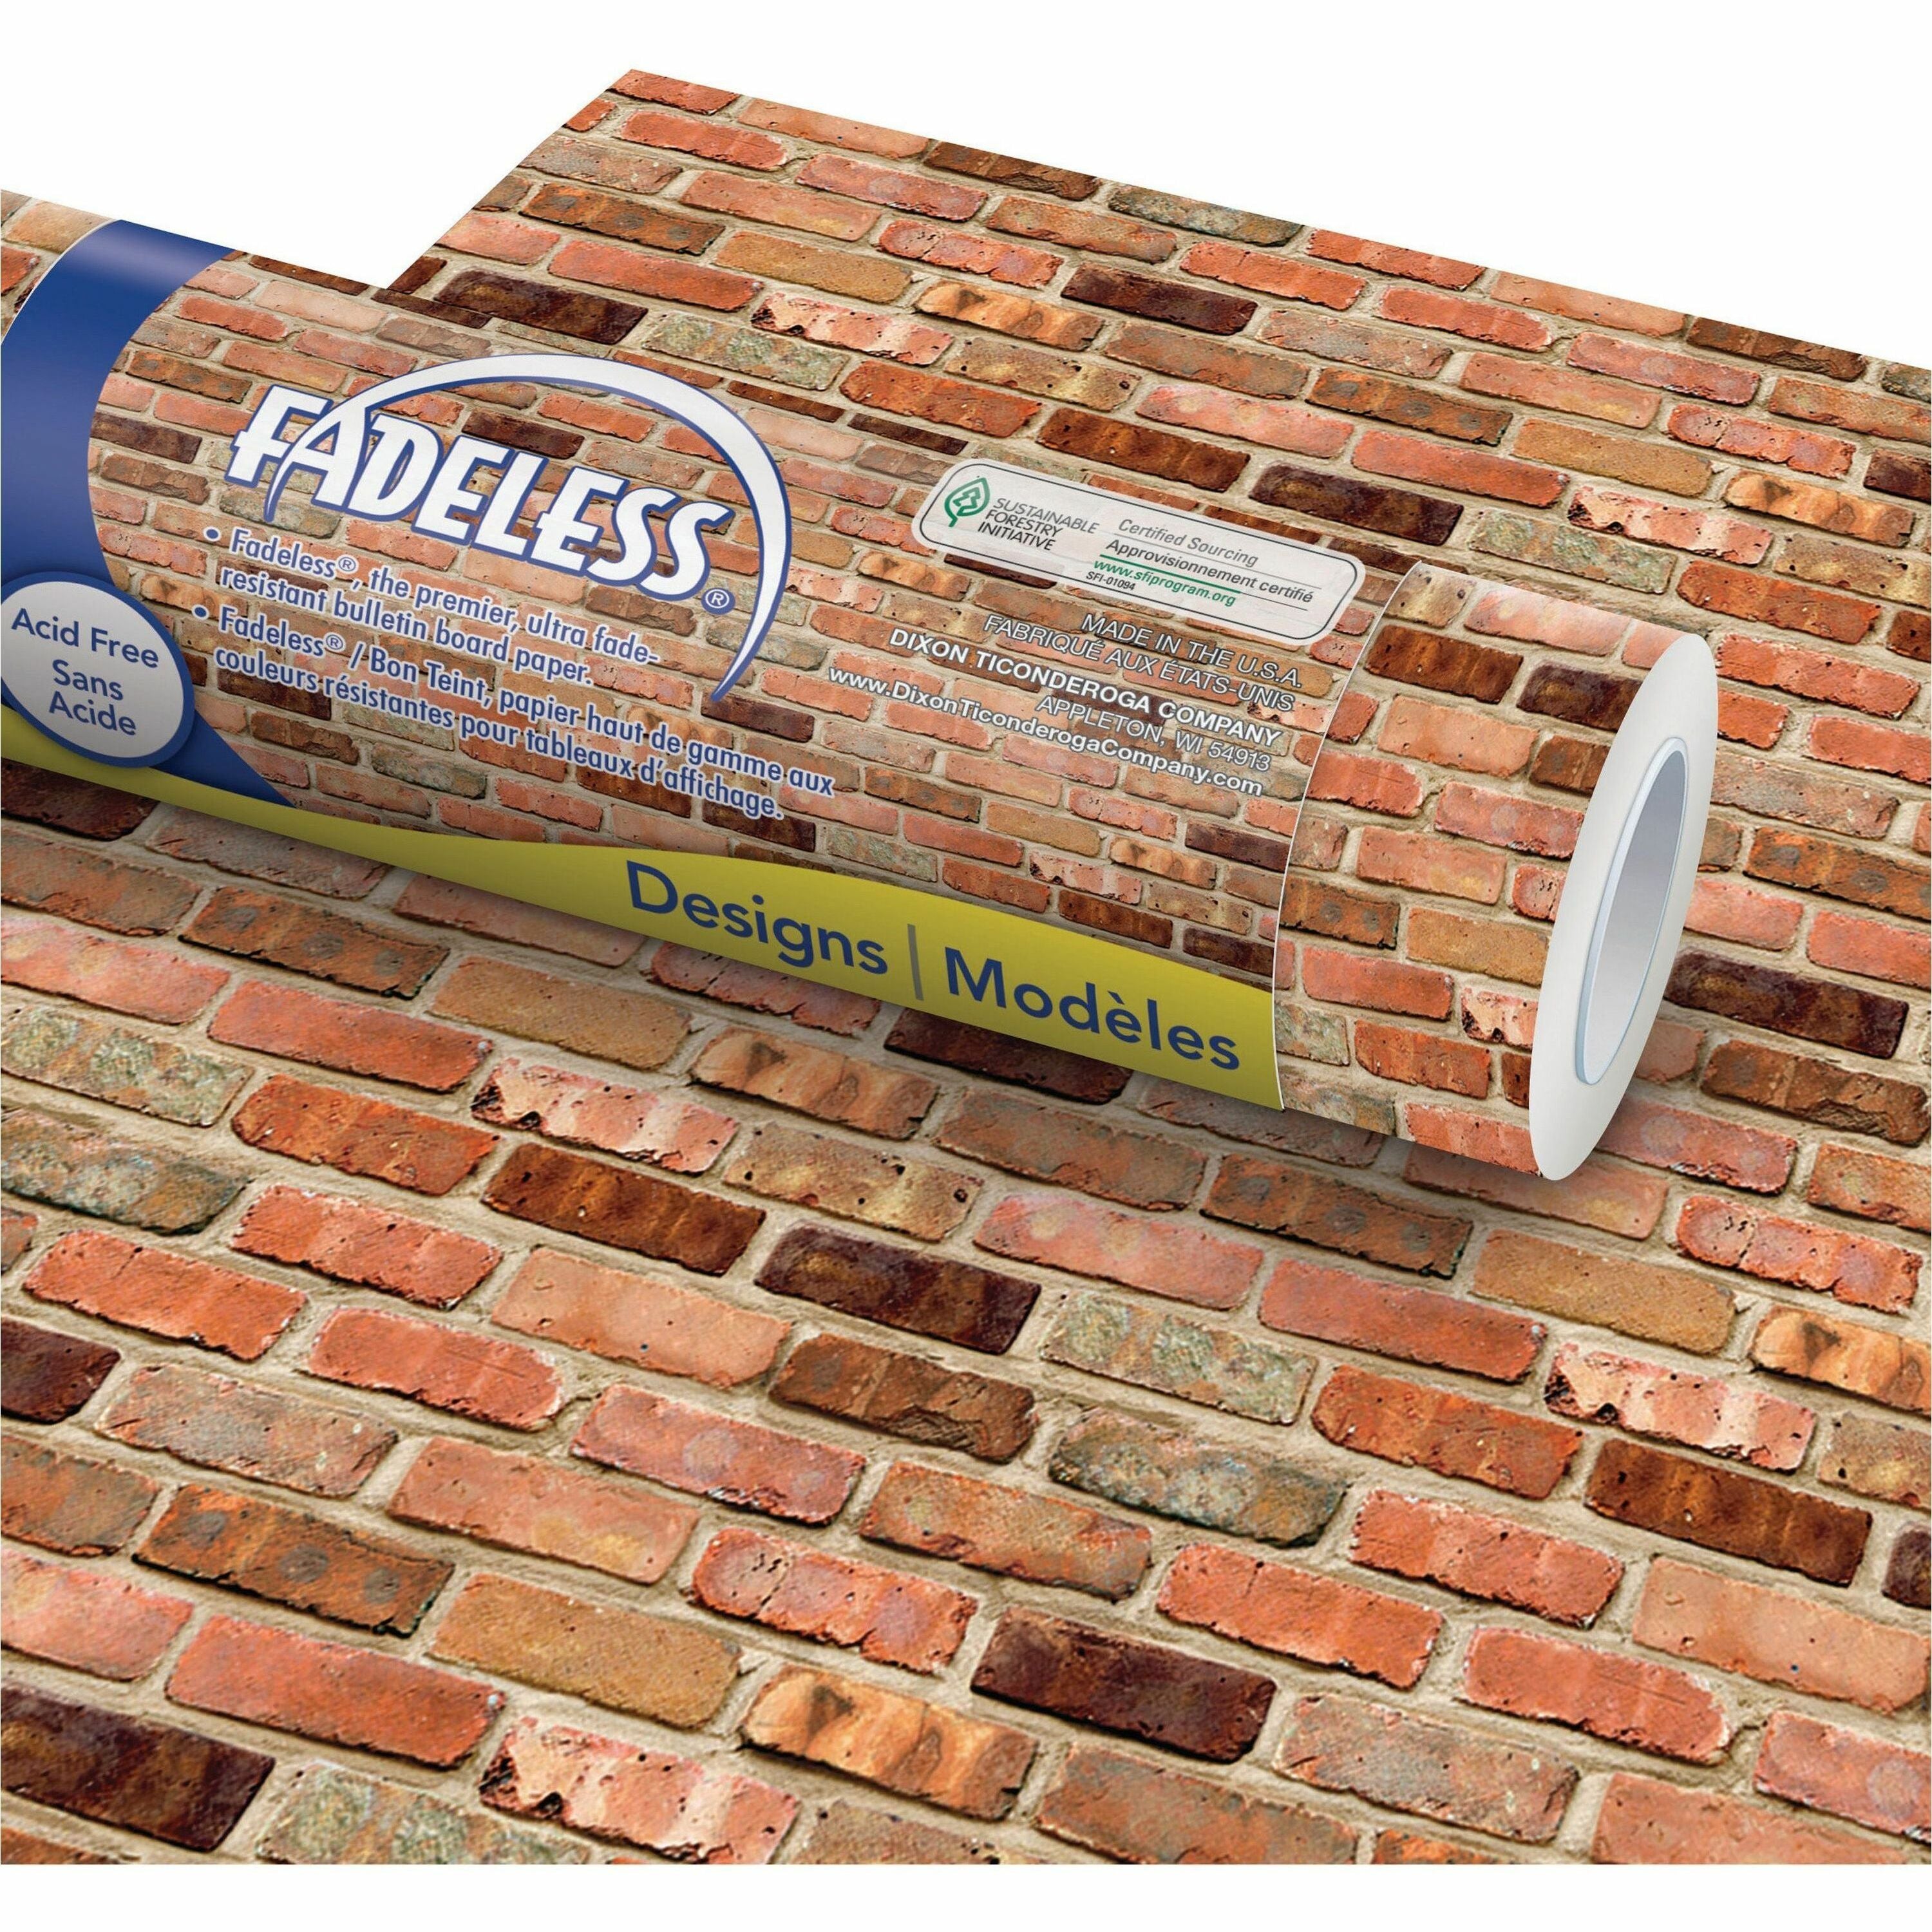 pacon-bulletin-board-paper-rolls-classroom-door-file-cabinet-school-home-office-project-display-table-skirting-party-decoration-48width-x-50-ftlength-1-roll-reclaimed-brick-paper_pacp0057465 - 1